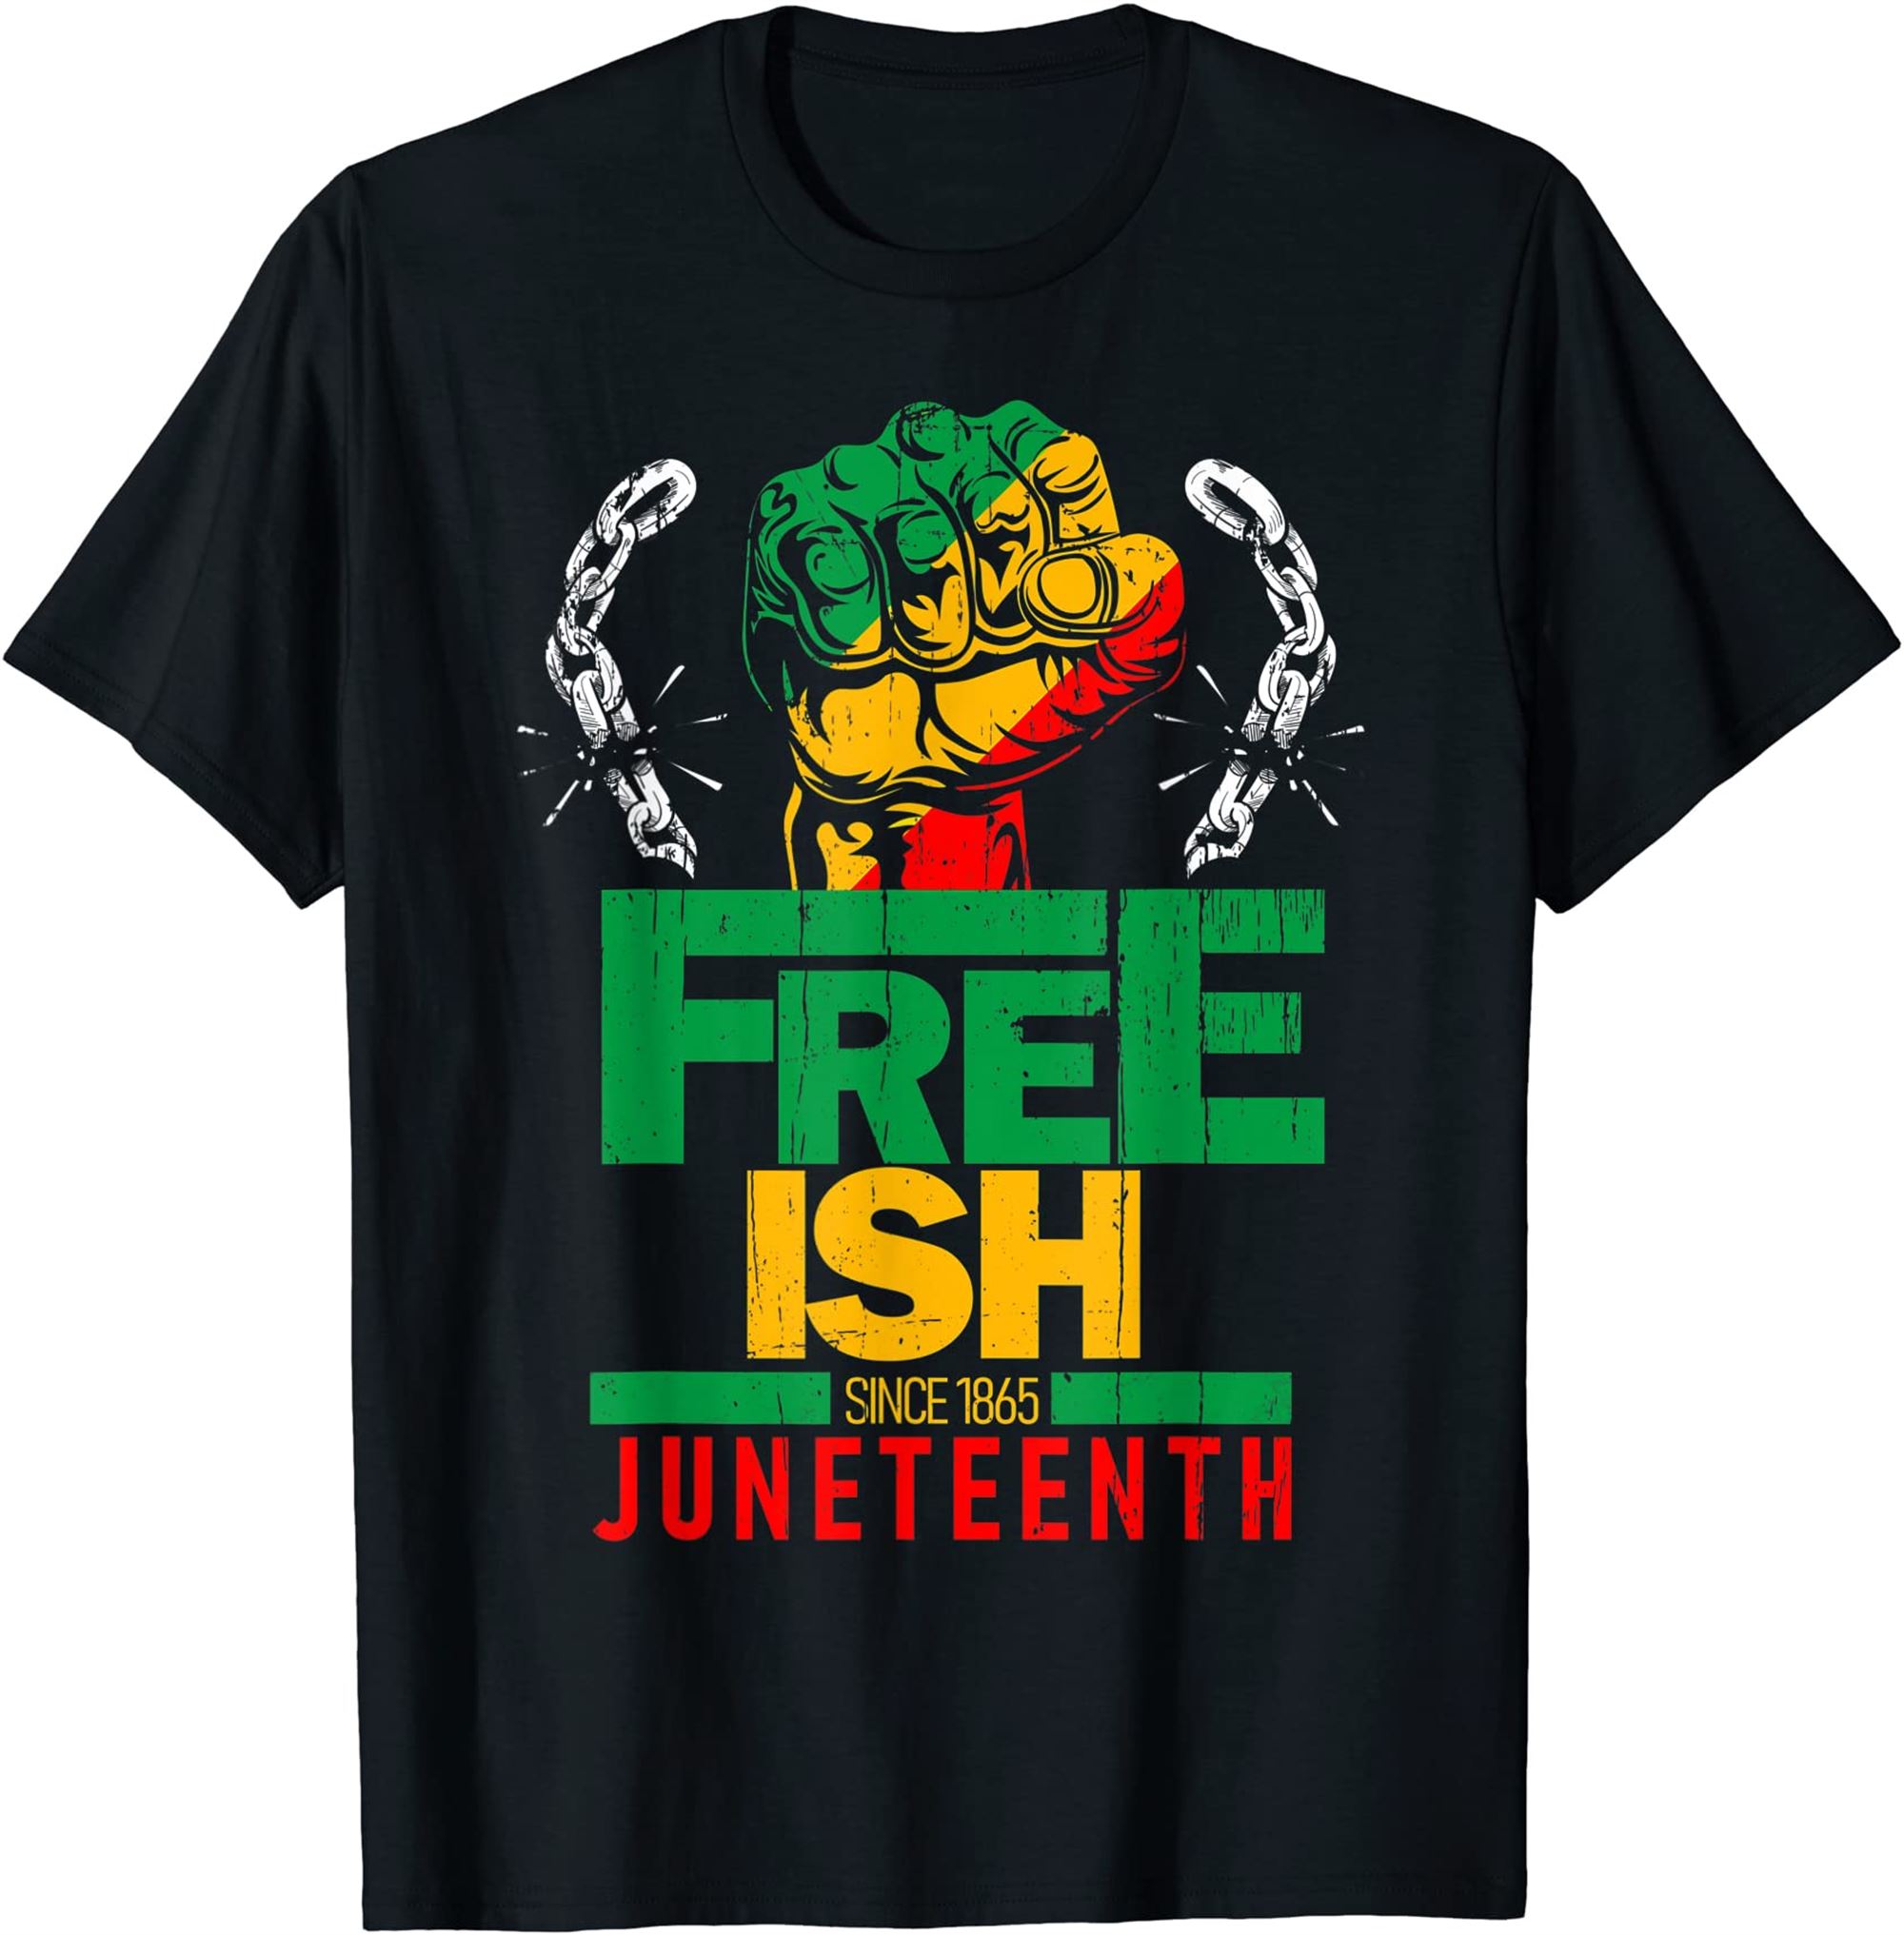 Free Ish Since 1865 Freeish Juneteenth My Independence Day Tshirt Plus Size Up To 5xl